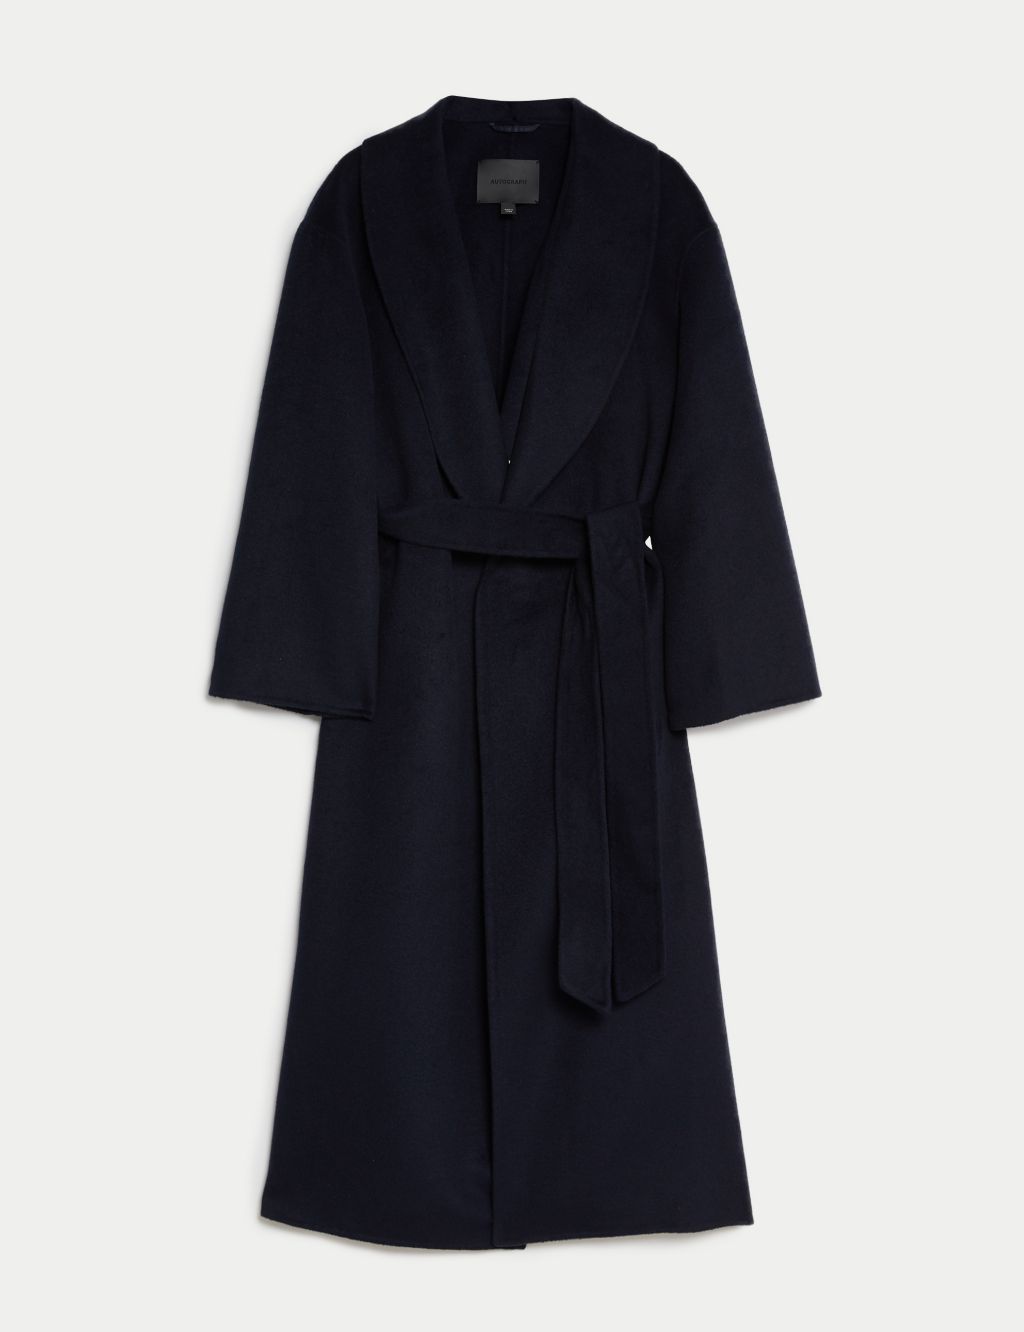 Wool Blend Belted Shawl Collar Wrap Coat image 2